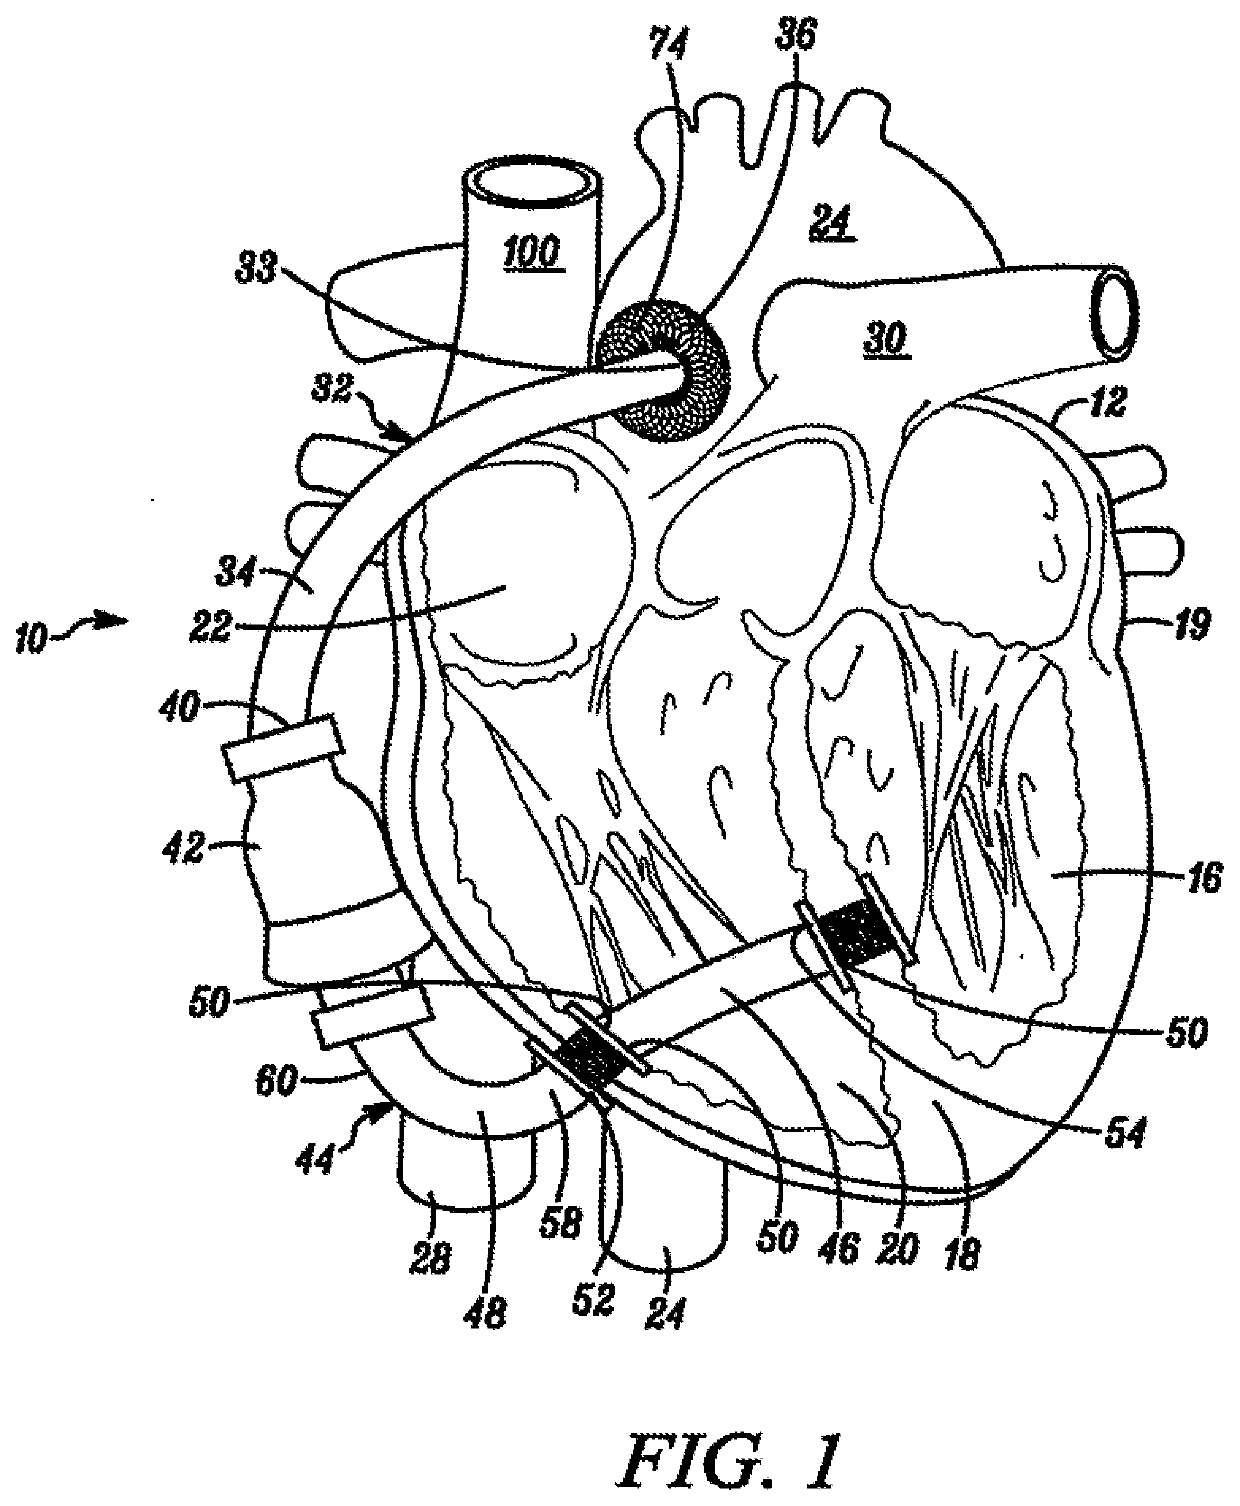 Percutaneous long term left ventricular assist device and non-invasive method for implanting same